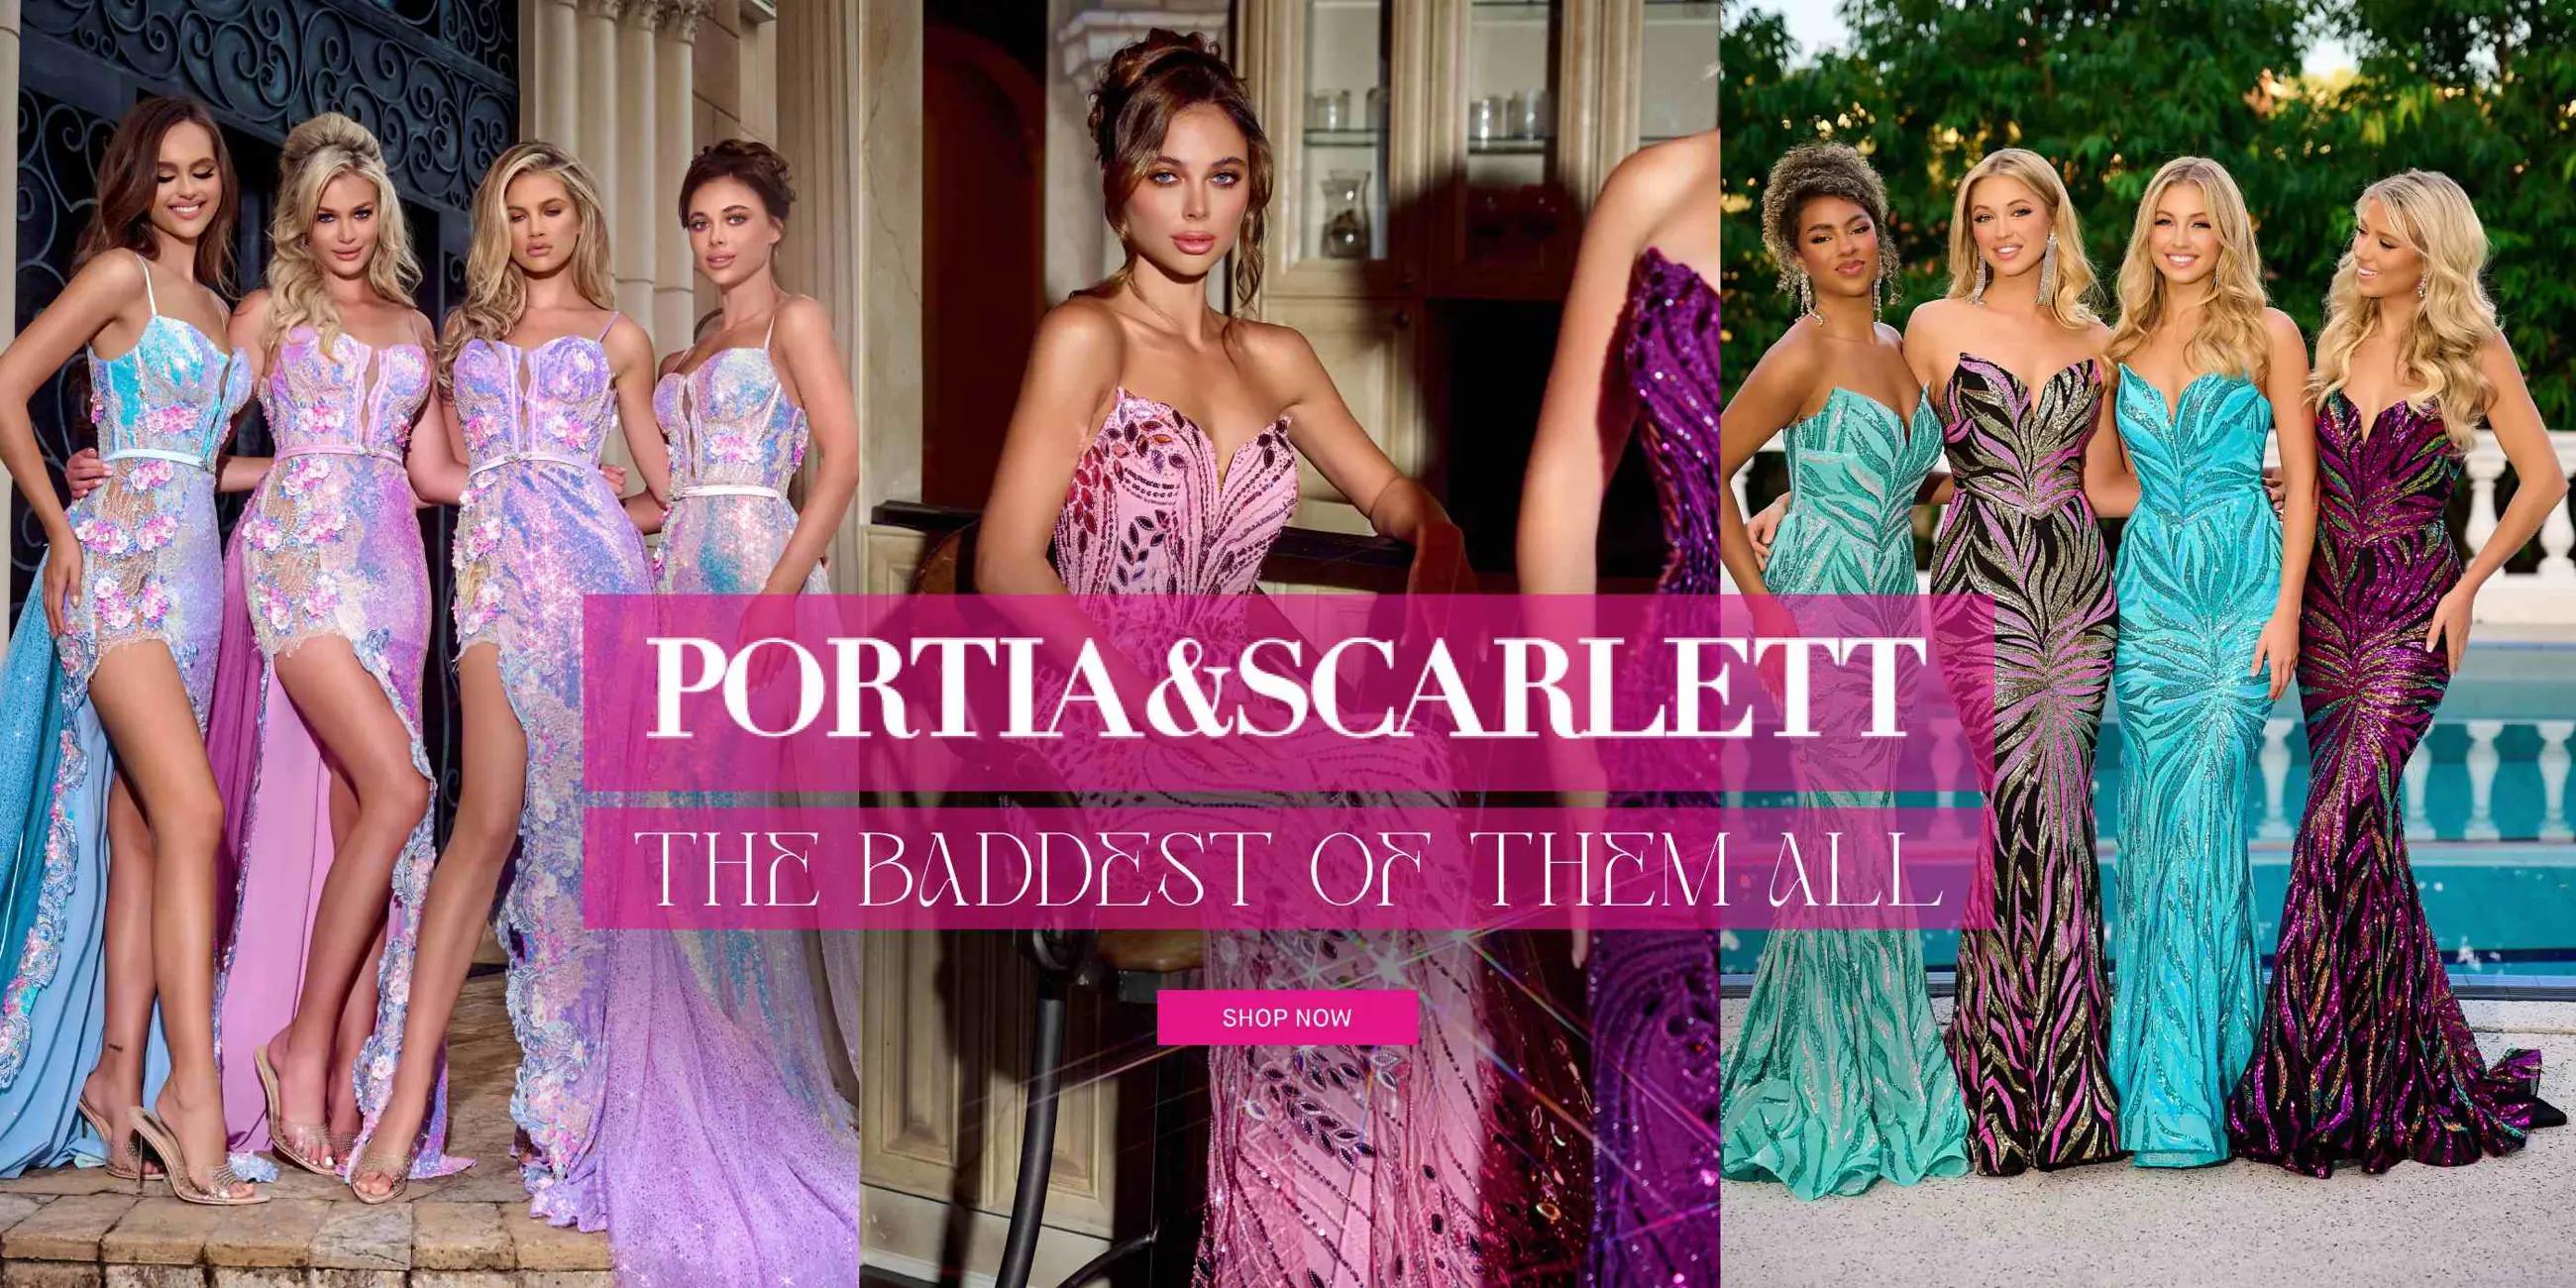 Portia & Scarlett special occassion dresses at Whatchamacallit